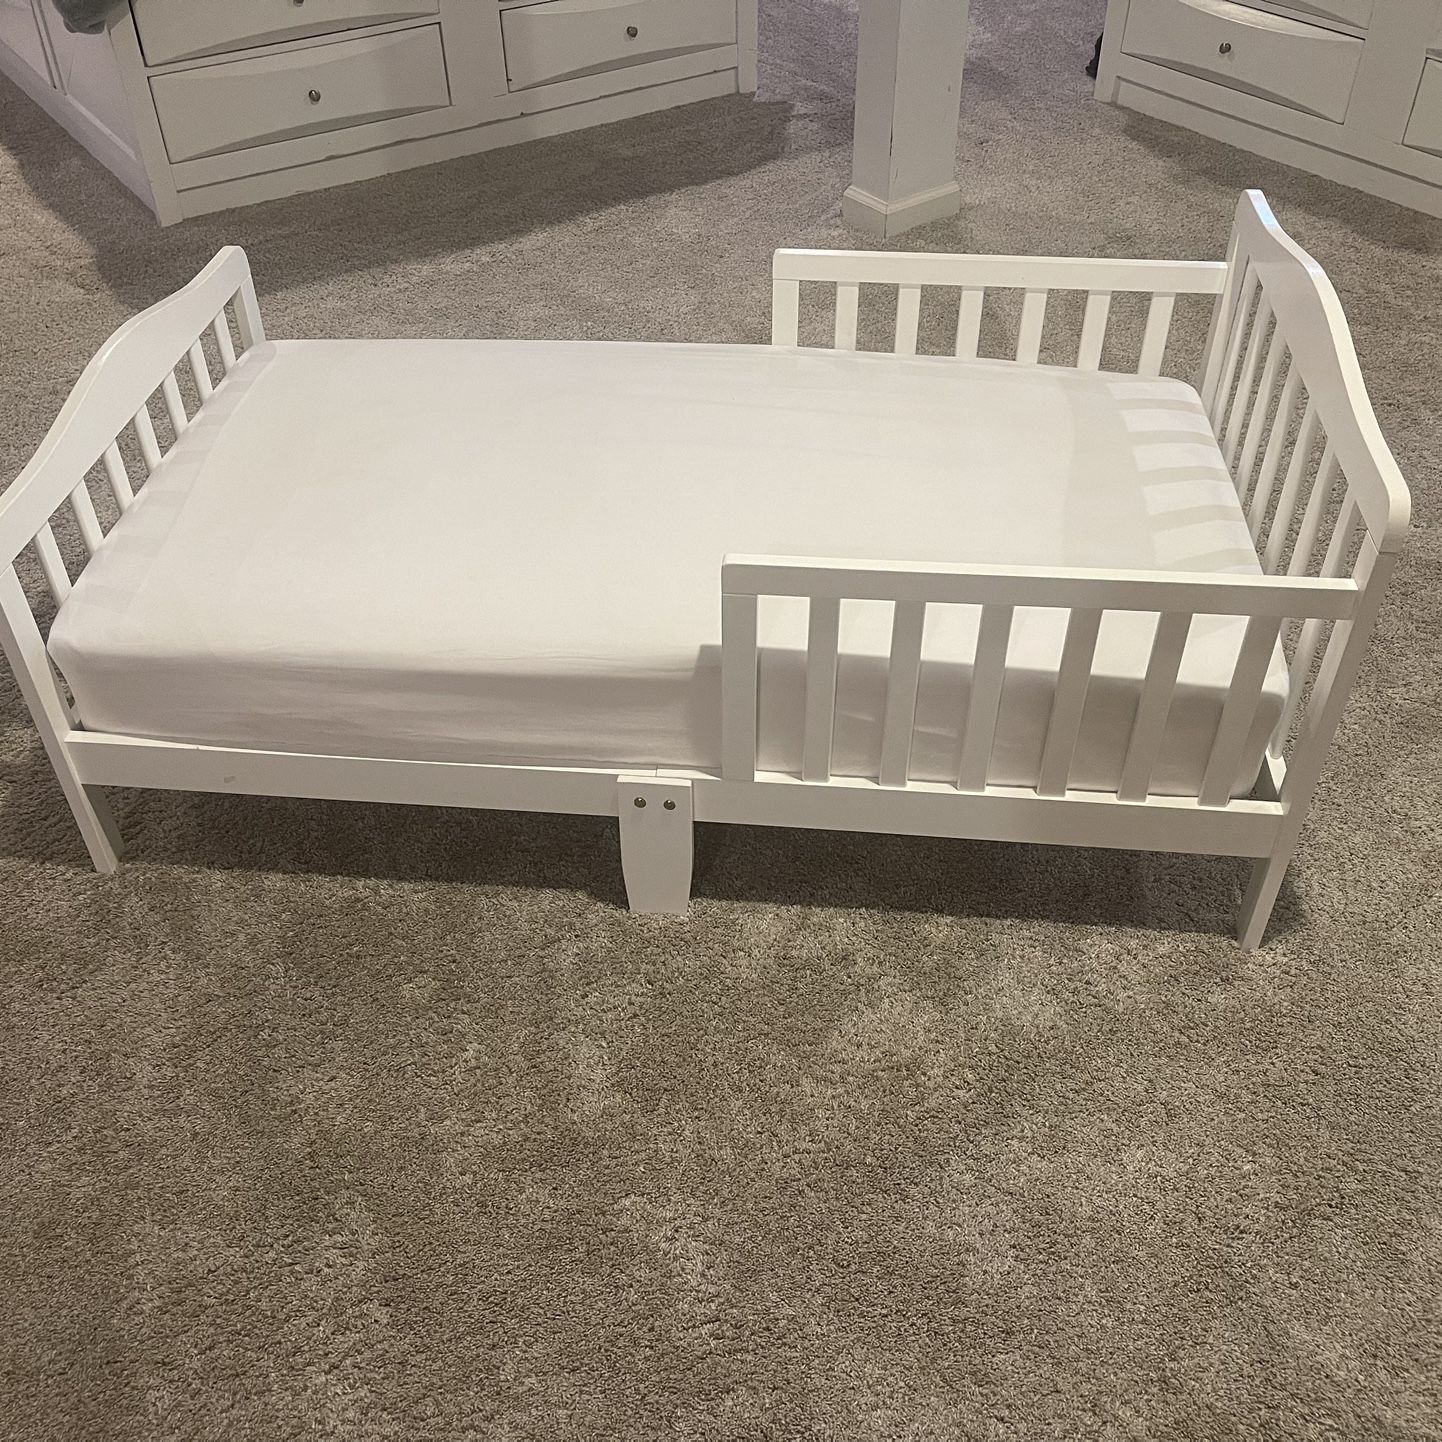 Big Oshi Contemporary Stylish Design White Toddler Day Bed With High Quality Mattress